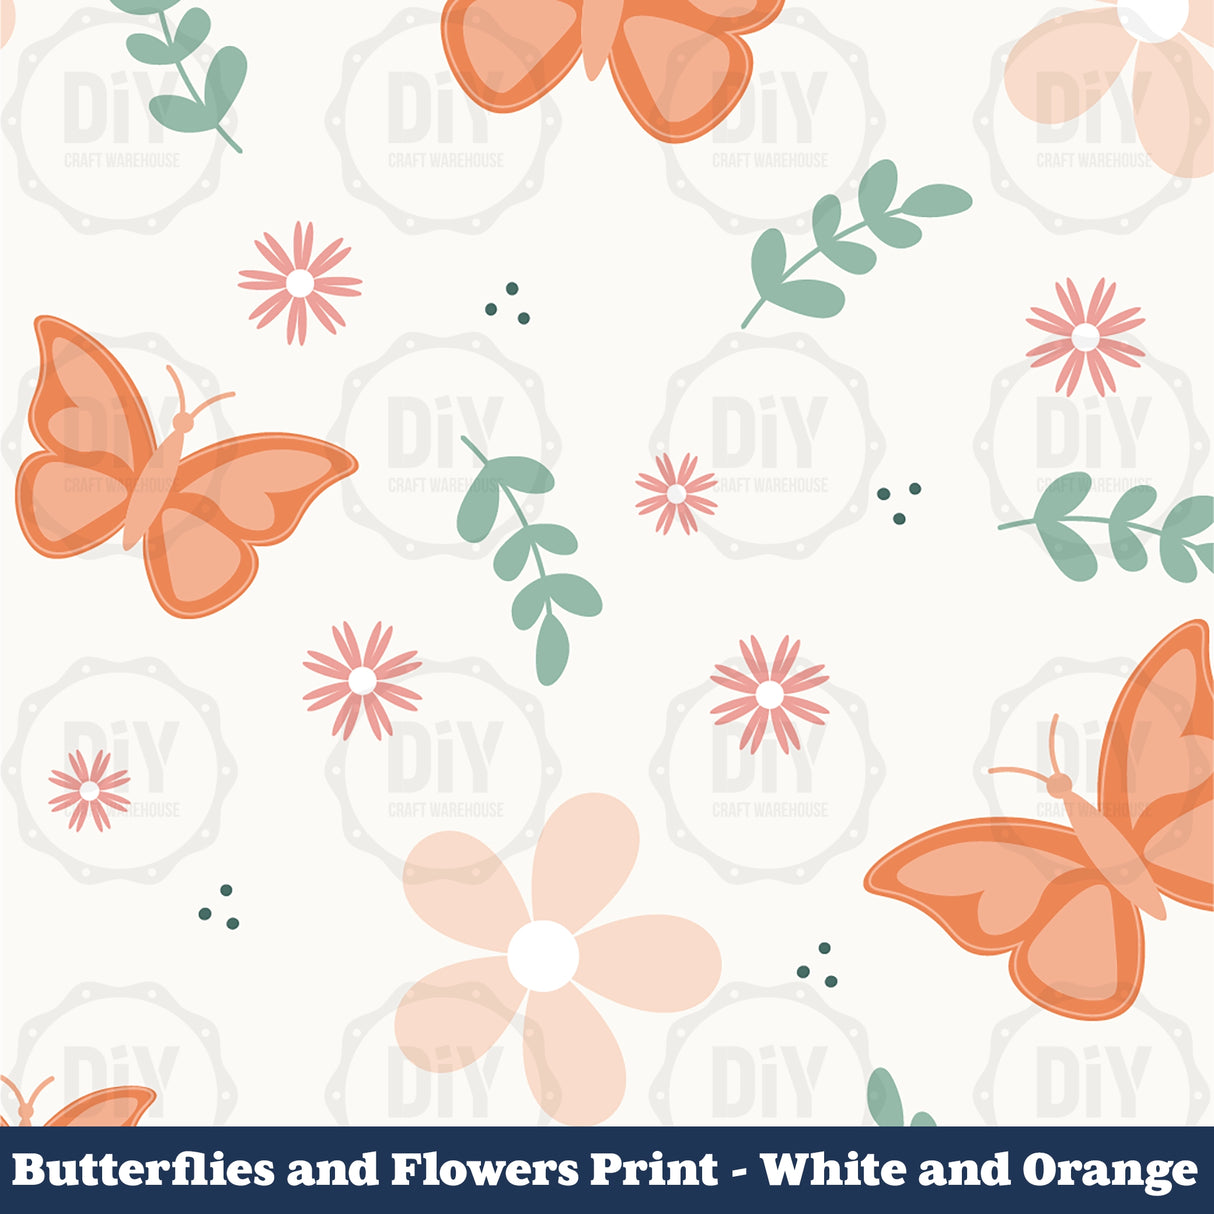 Butterflies and Flowers Sublimation Transfer - White & Orange